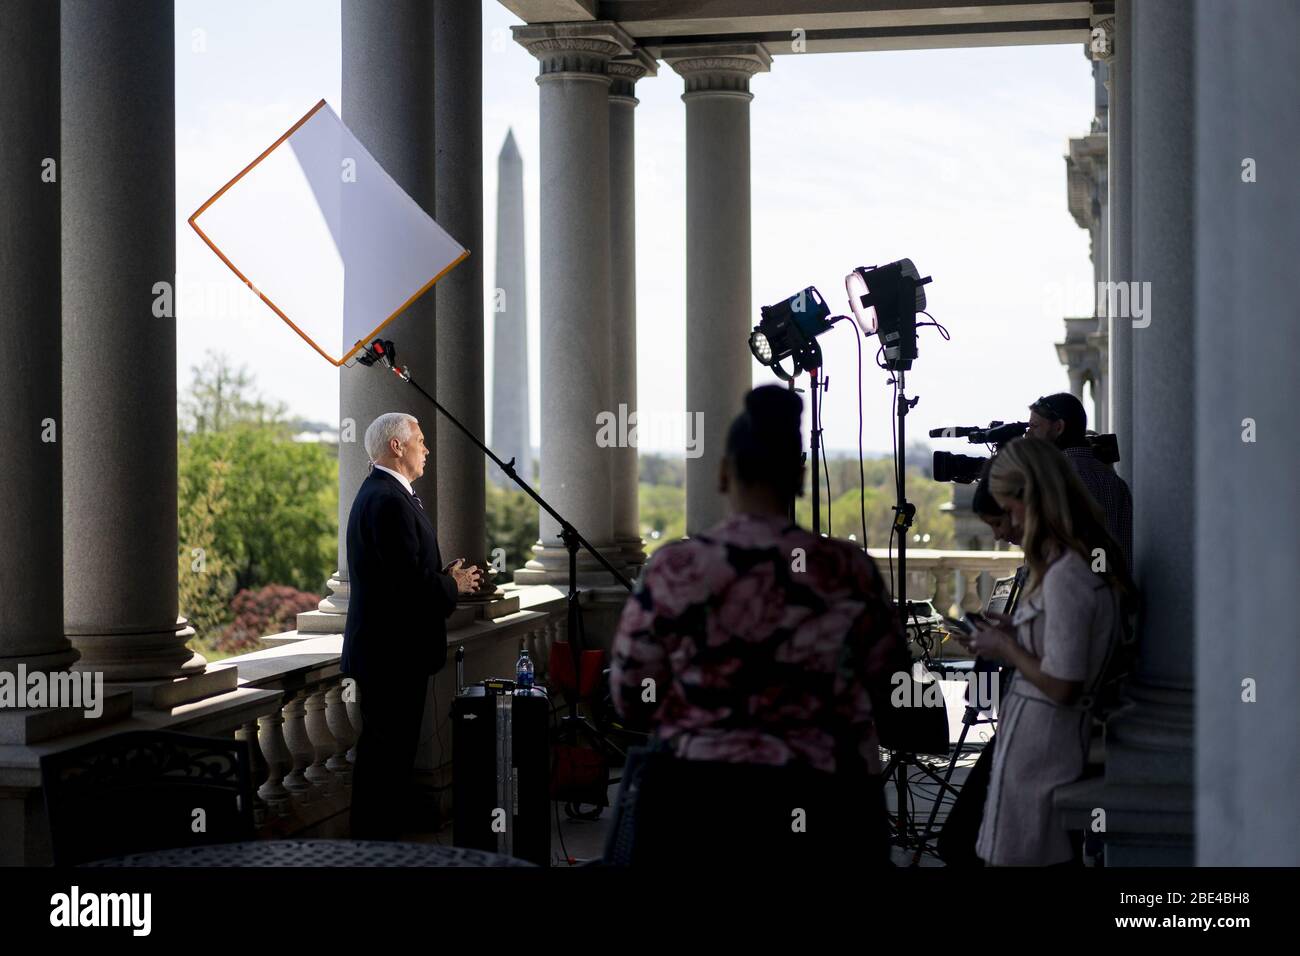 Washington, United States Of America. 08th Apr, 2020. Vice President Mike Pence participates in a taped interview with Sean Hannity of Fox News on the balcony of the Vice PresidentÕs Ceremonial Office Wednesday, April 8, 2020, in the Eisenhower Executive Office Building of the White House People: Vice President Mike Pence Credit: Storms Media Group/Alamy Live News Stock Photo